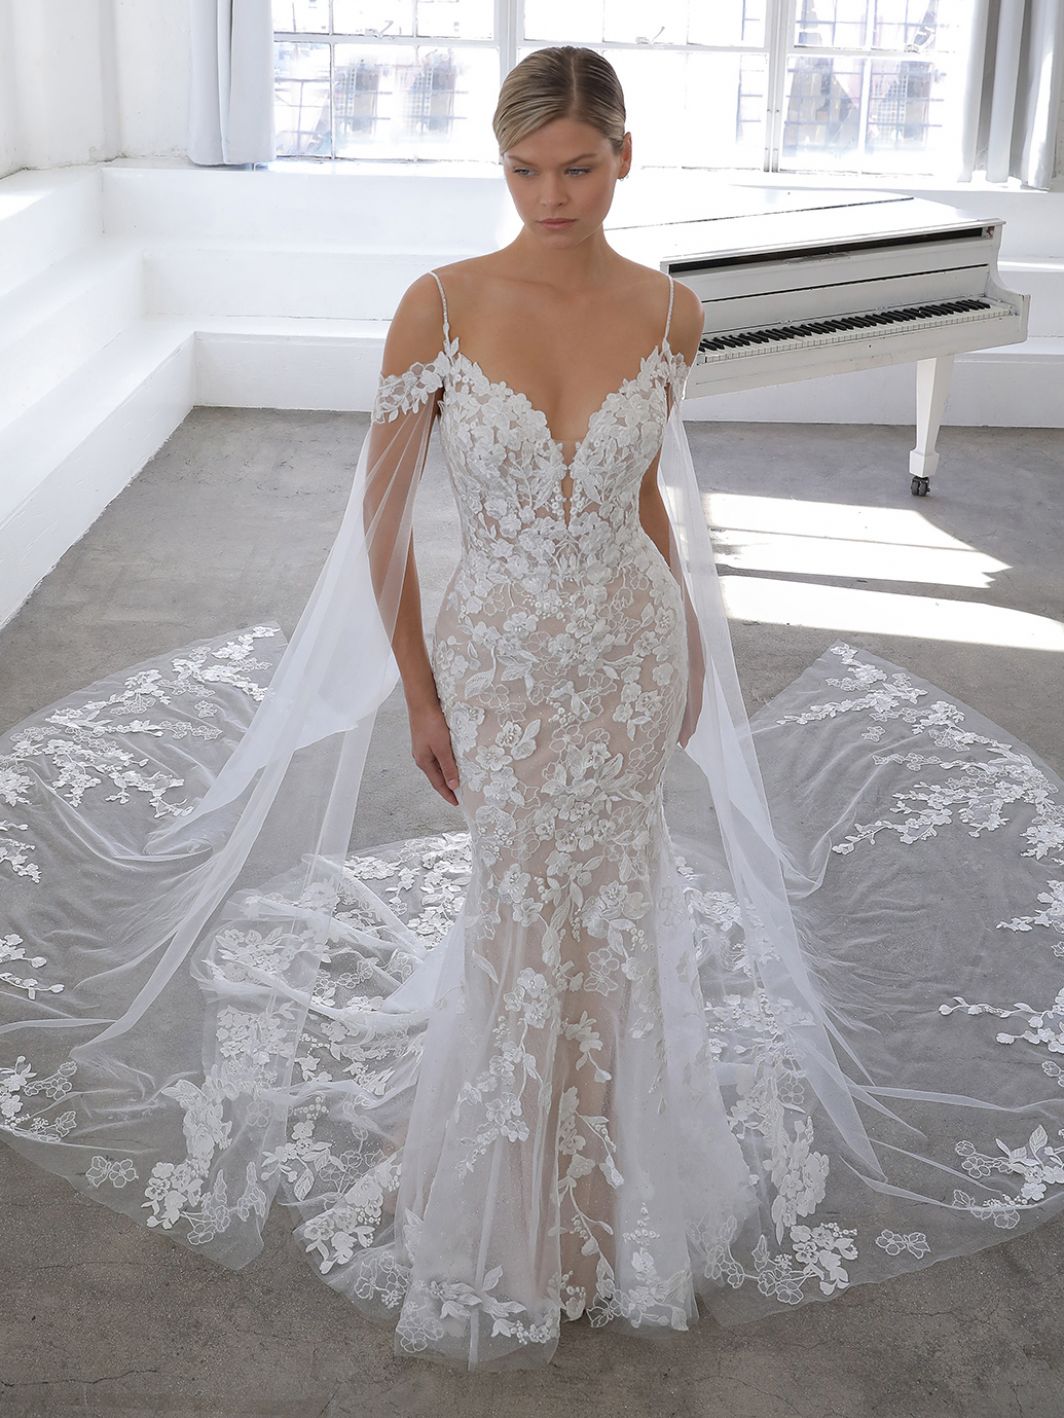 Full Lace Wedding Dress with Fit and Flare Shape  and Detachable Shoulder Cape - off the rack wedding dress